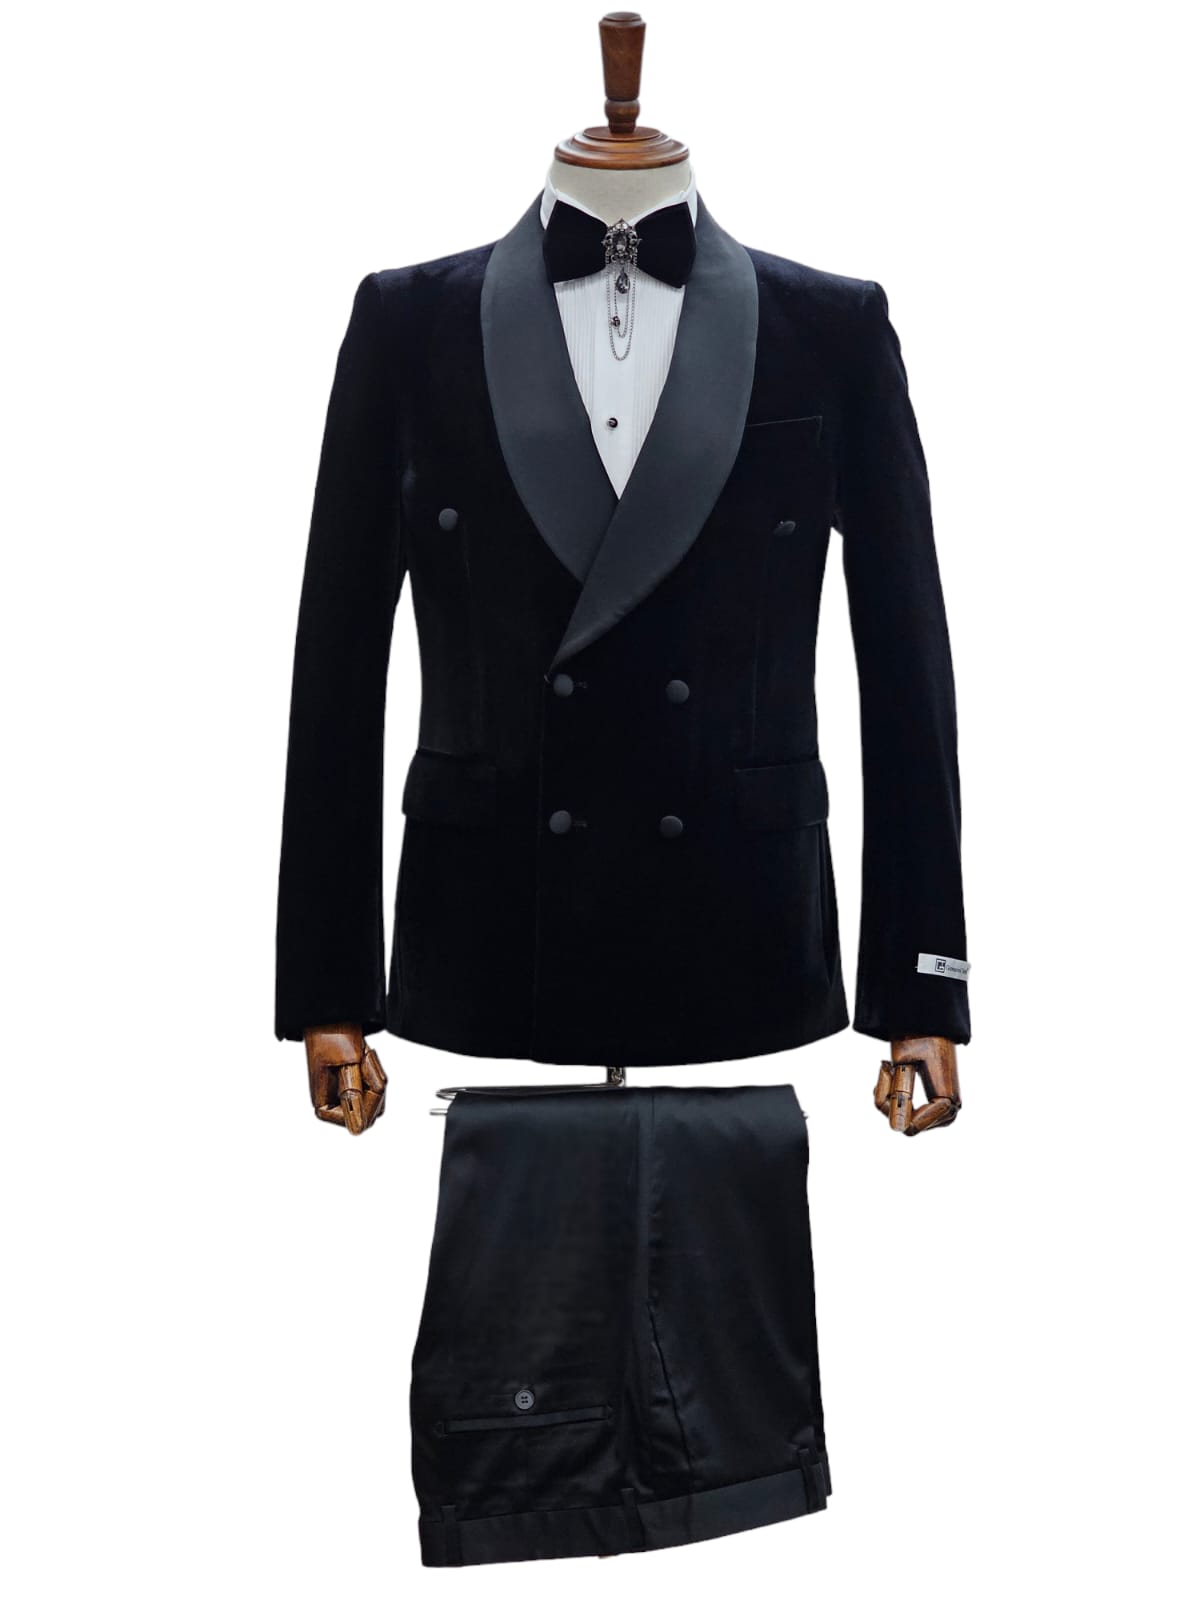 KCT Menswear - Velvet Black Glitter Gold Blazer with Shawl Lapel -  Luxurious and Stylish for Prom and Formal events, Free Shipping